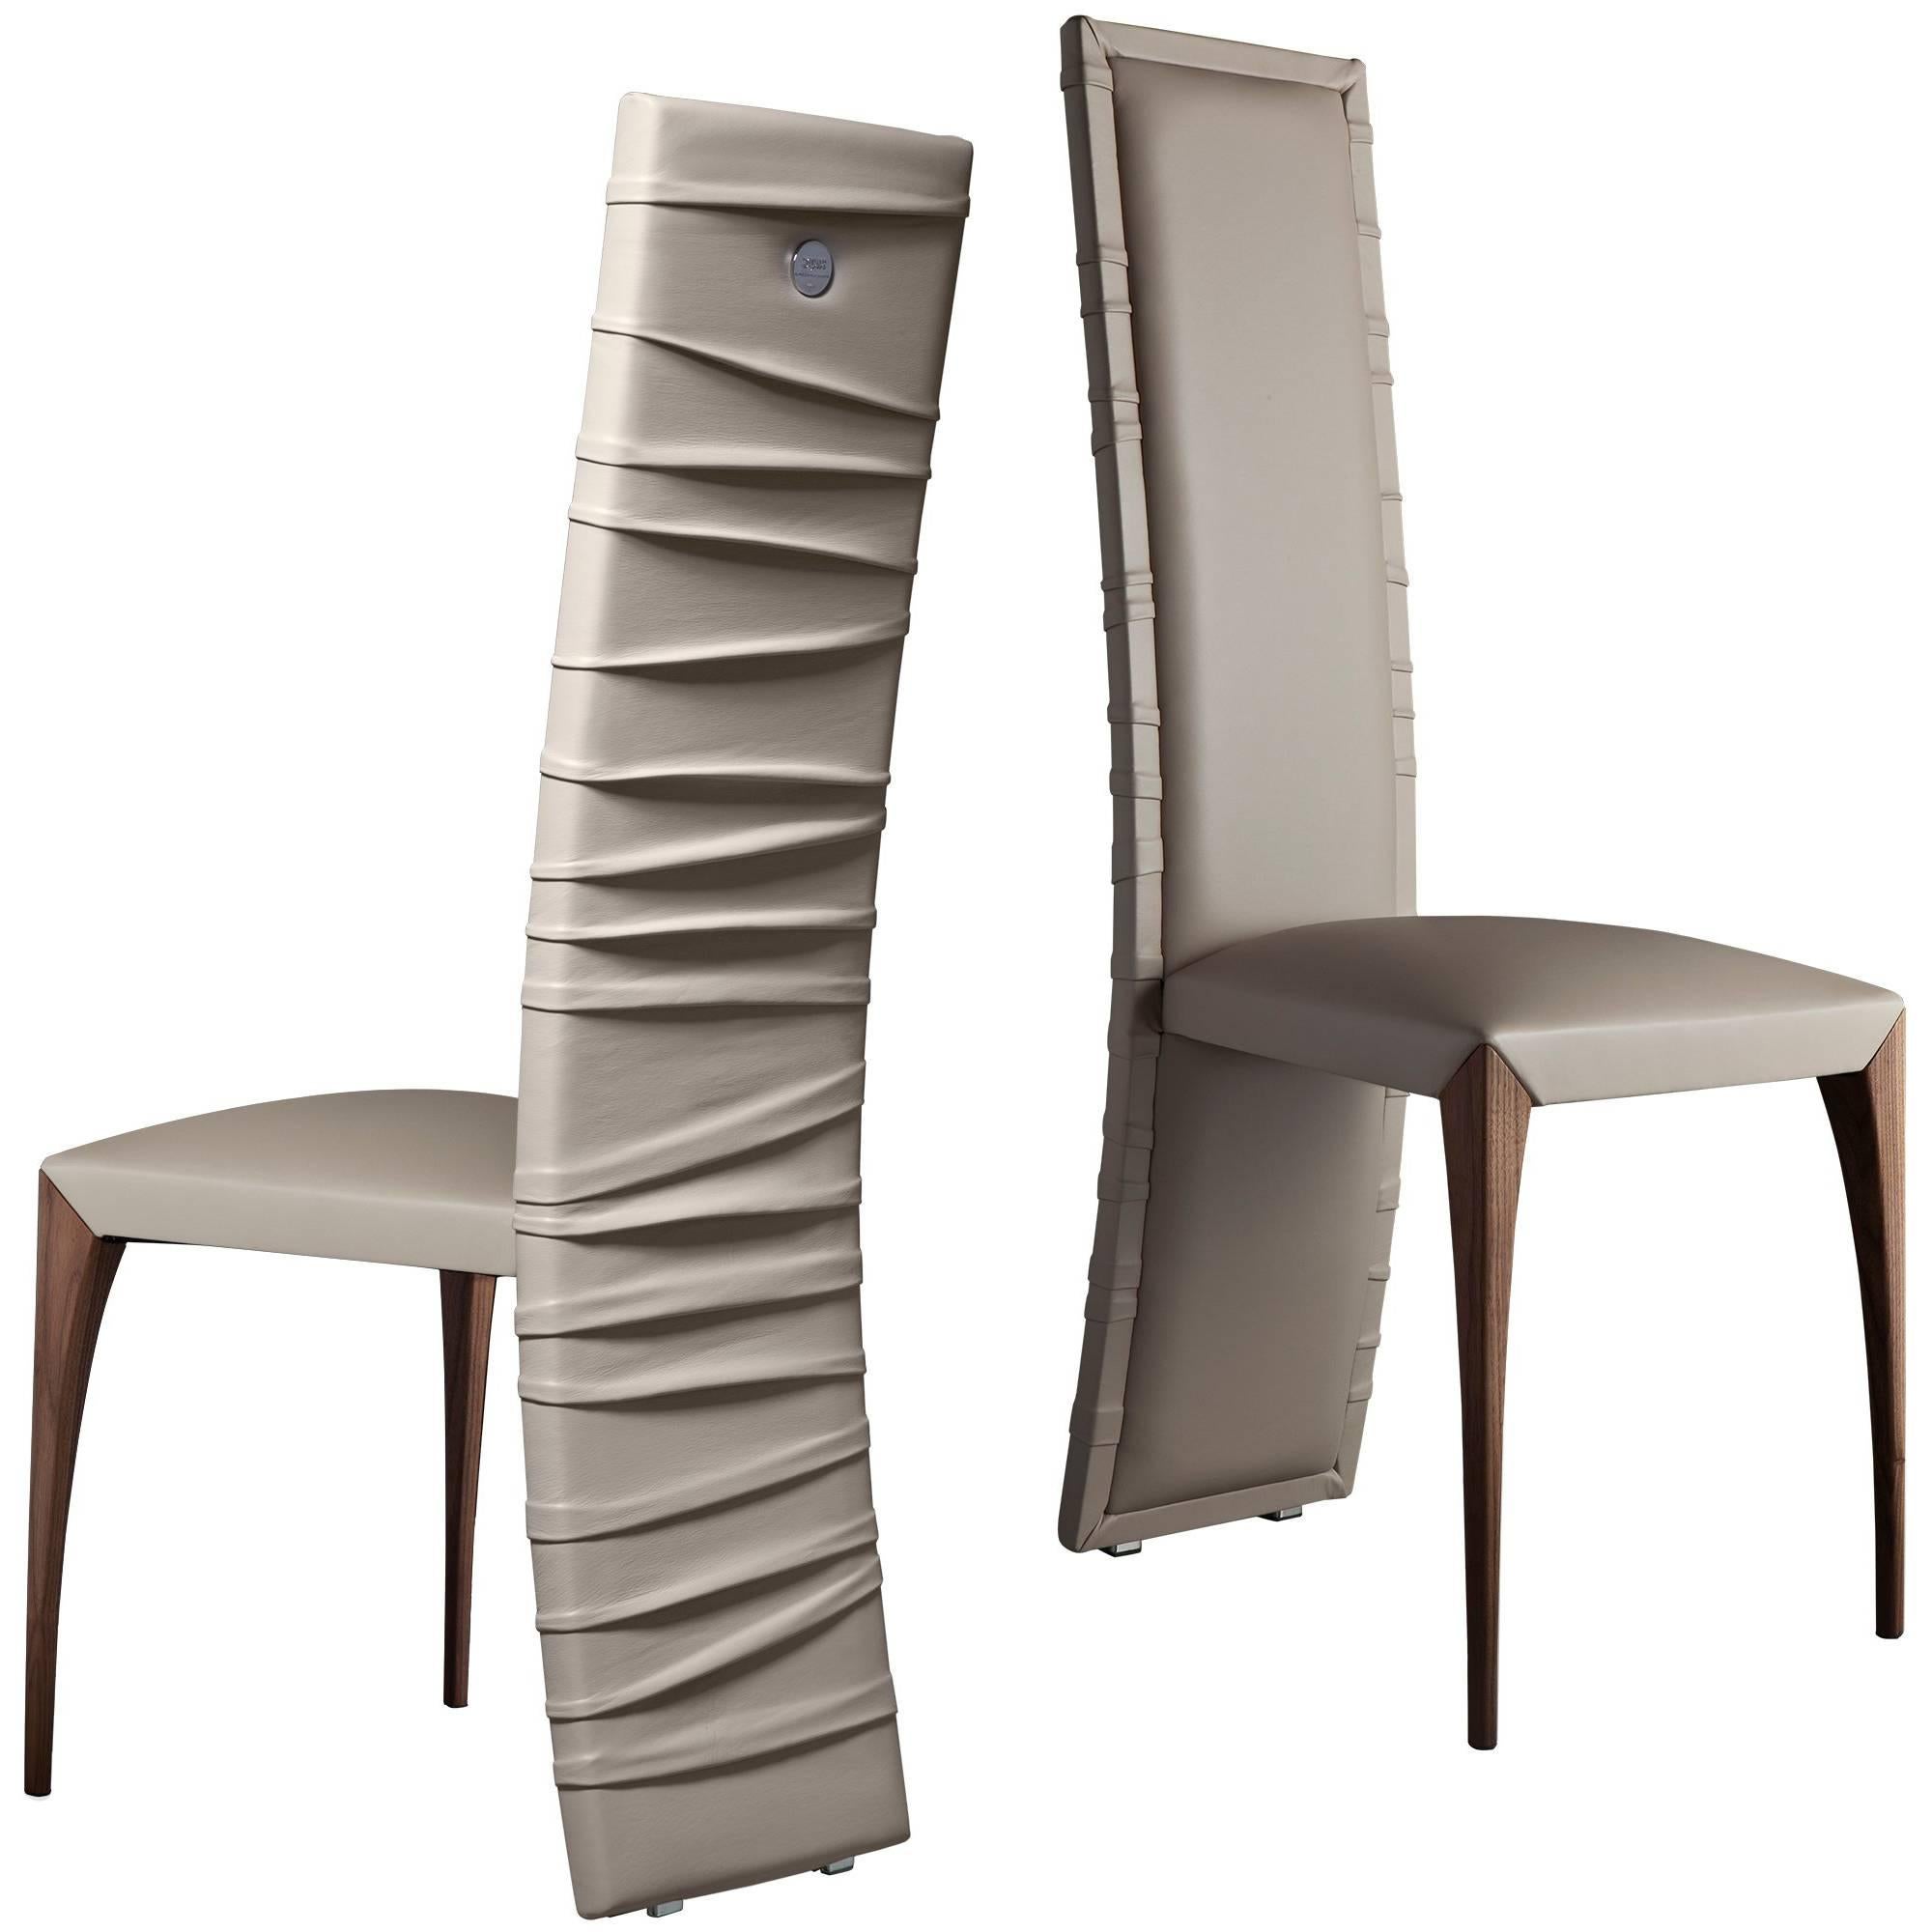 "Il Pezzo 7 Chair" dining chair with high back - upholstered in beige leather